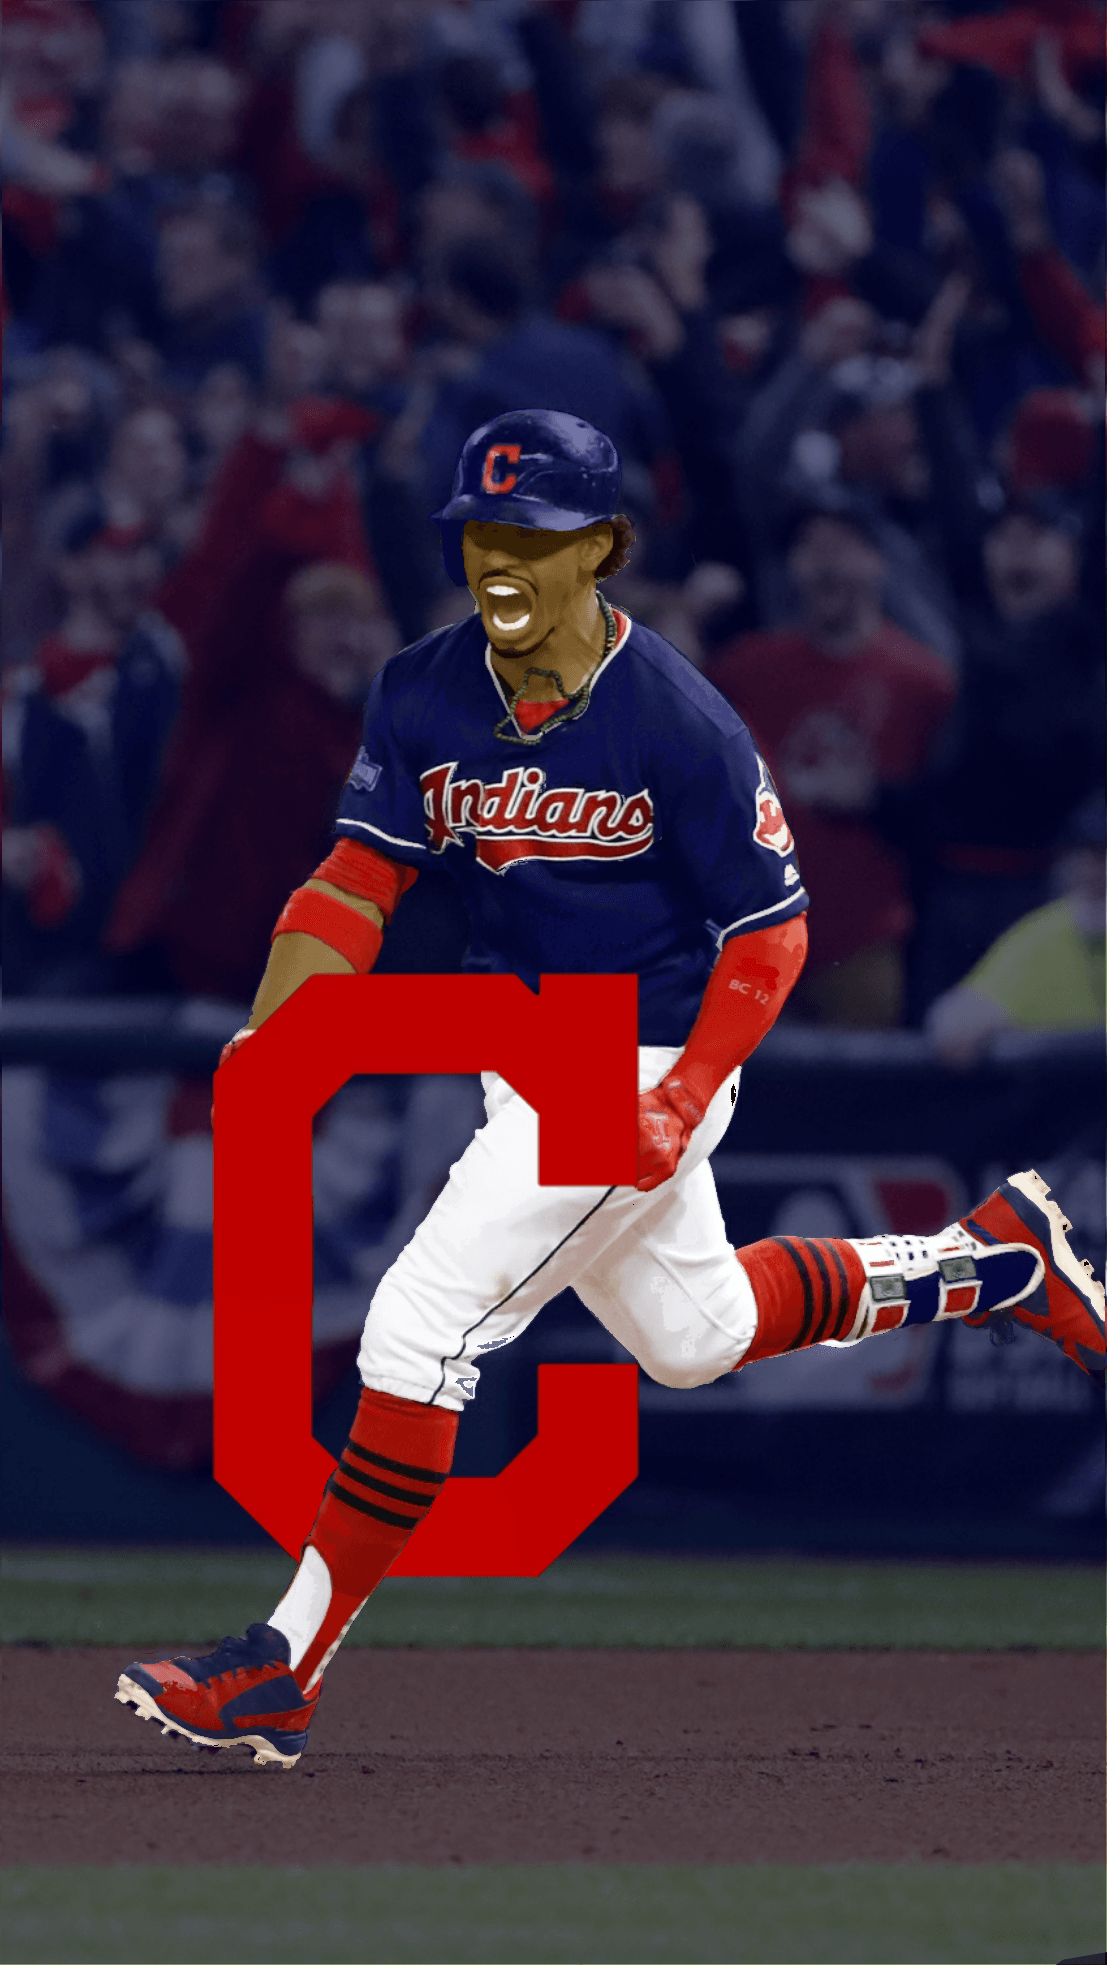 Indians wallpaper by DawgPound1 - Download on ZEDGE™